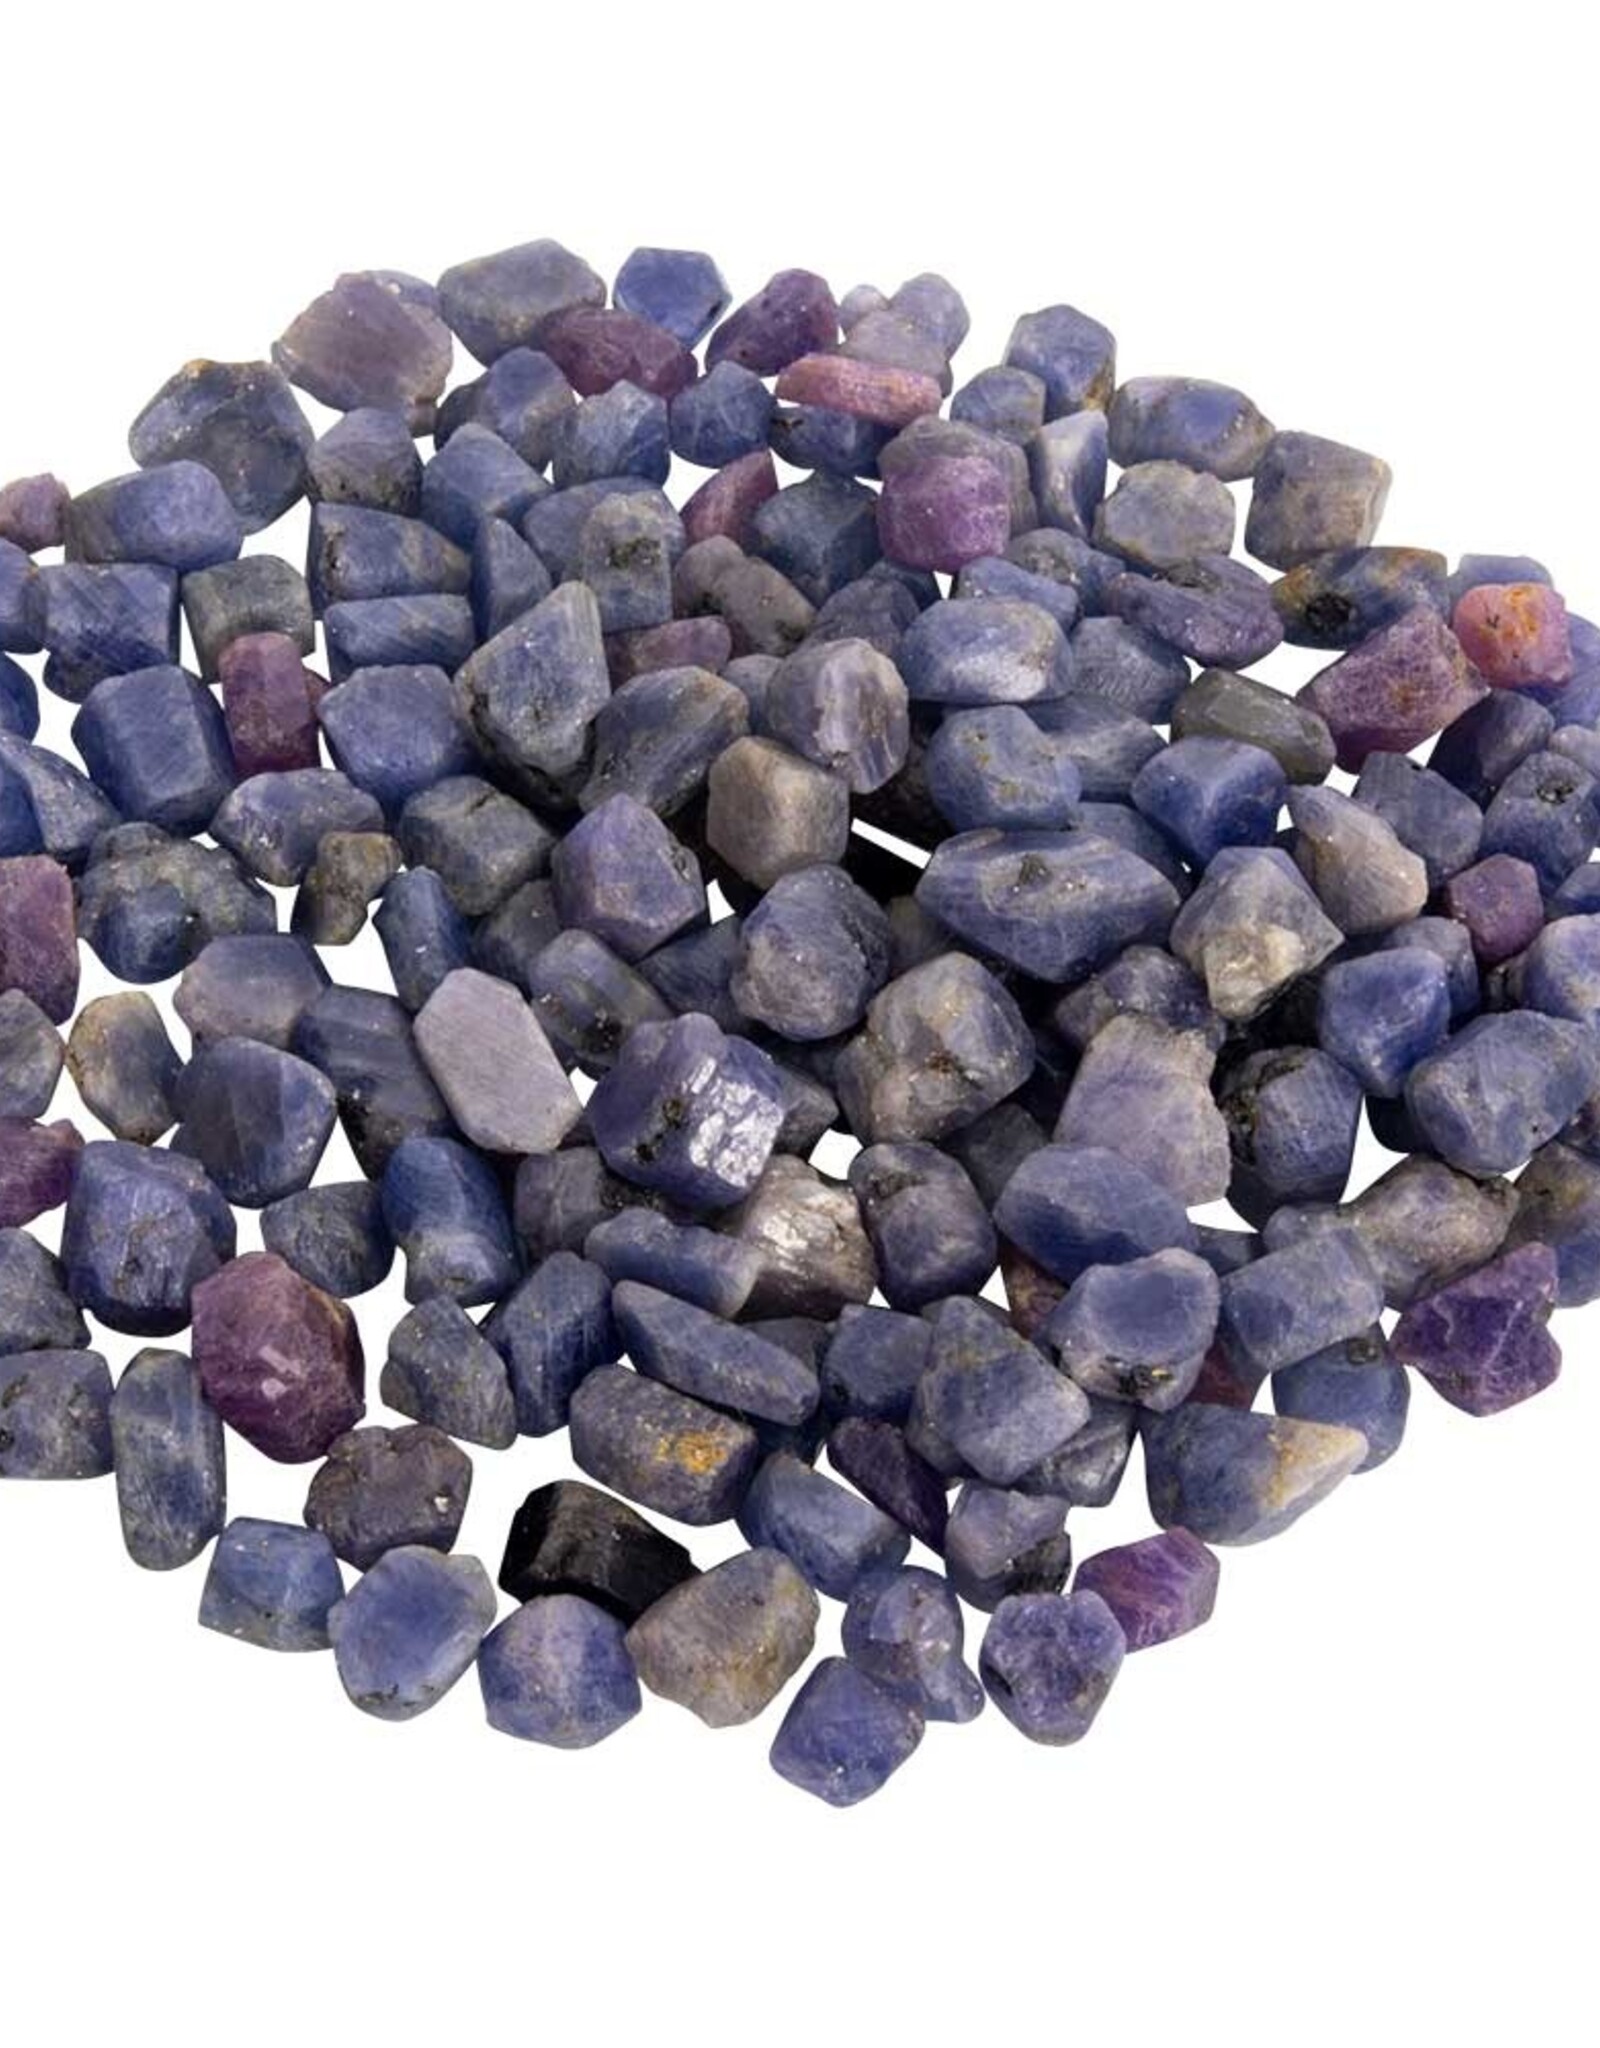 SAPPHIRE-GEMSTONE-ROUGH MINI NUGGETS Bag approx 100 small pieces